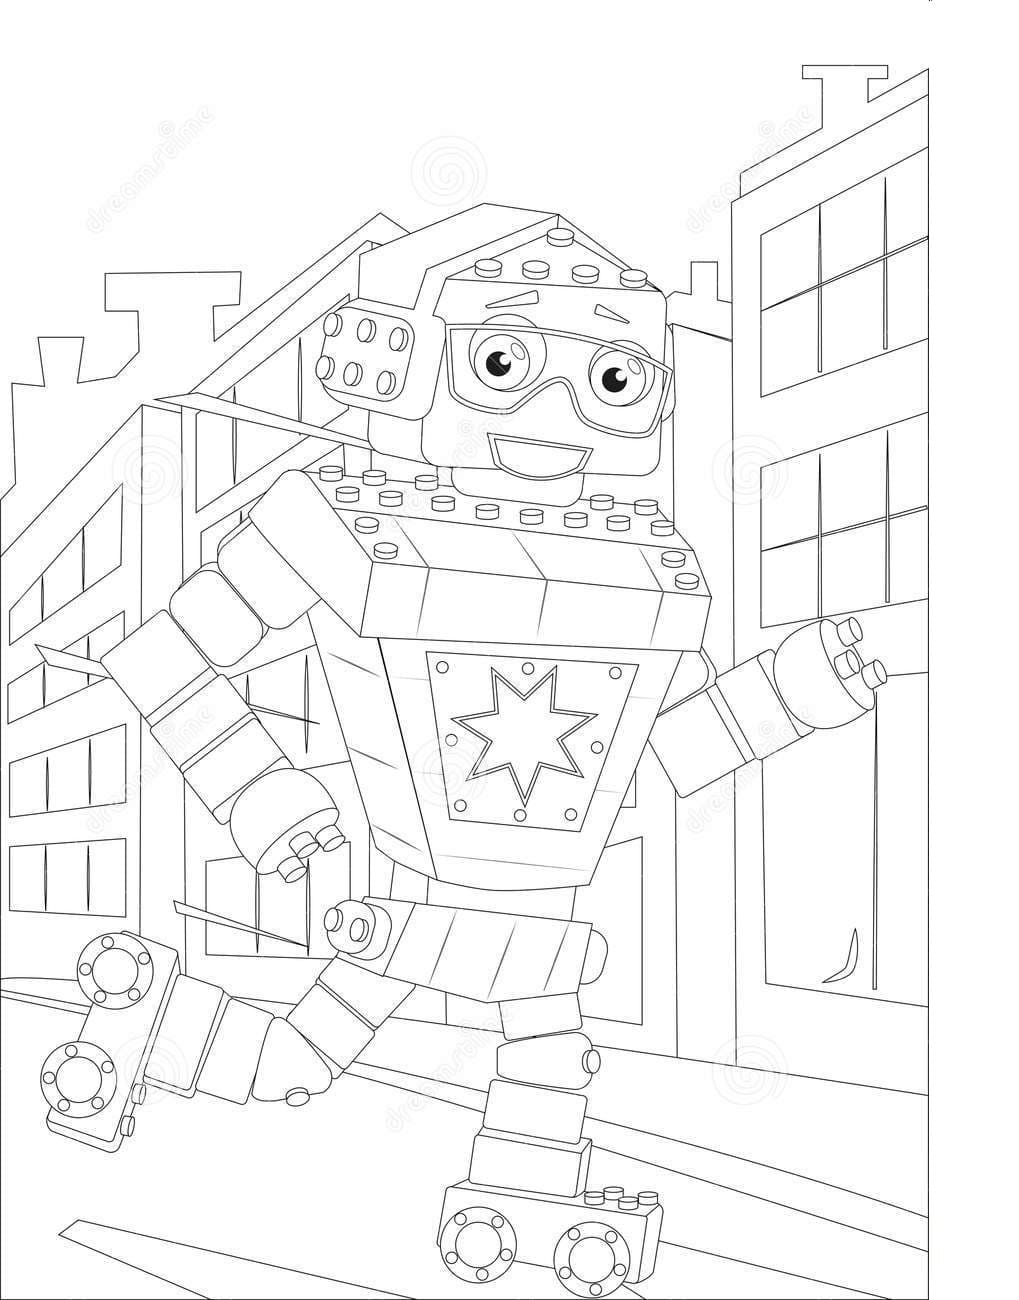 A Robot Roller-skate Coloring Page